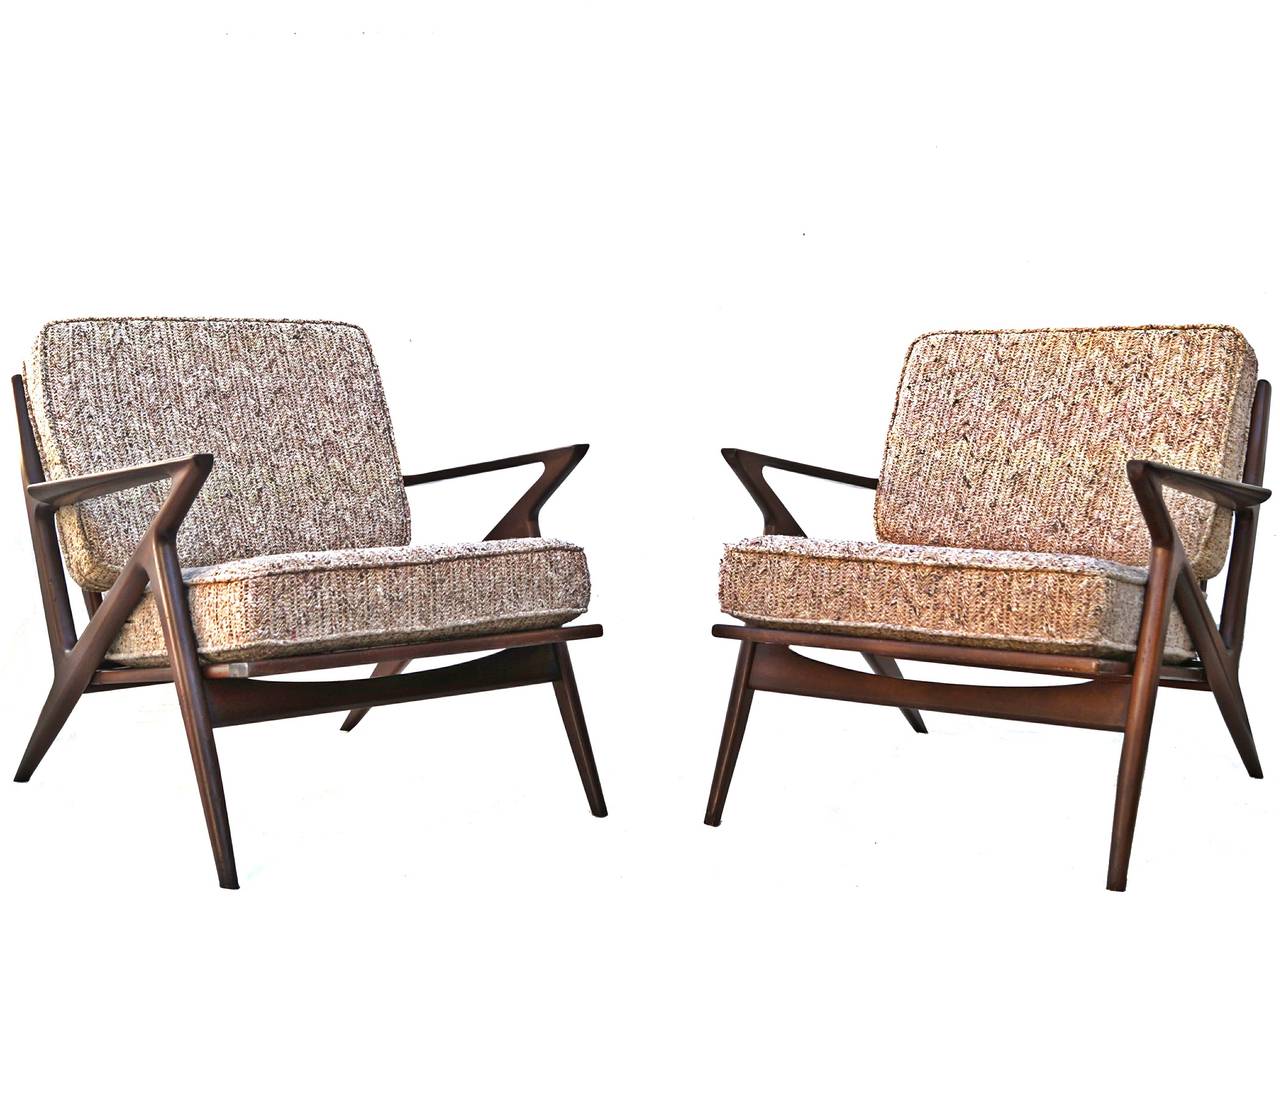 Pair of Poul Jensen Z Chairs, Selig. One retains original medallion.They have newer straps beneath seat.